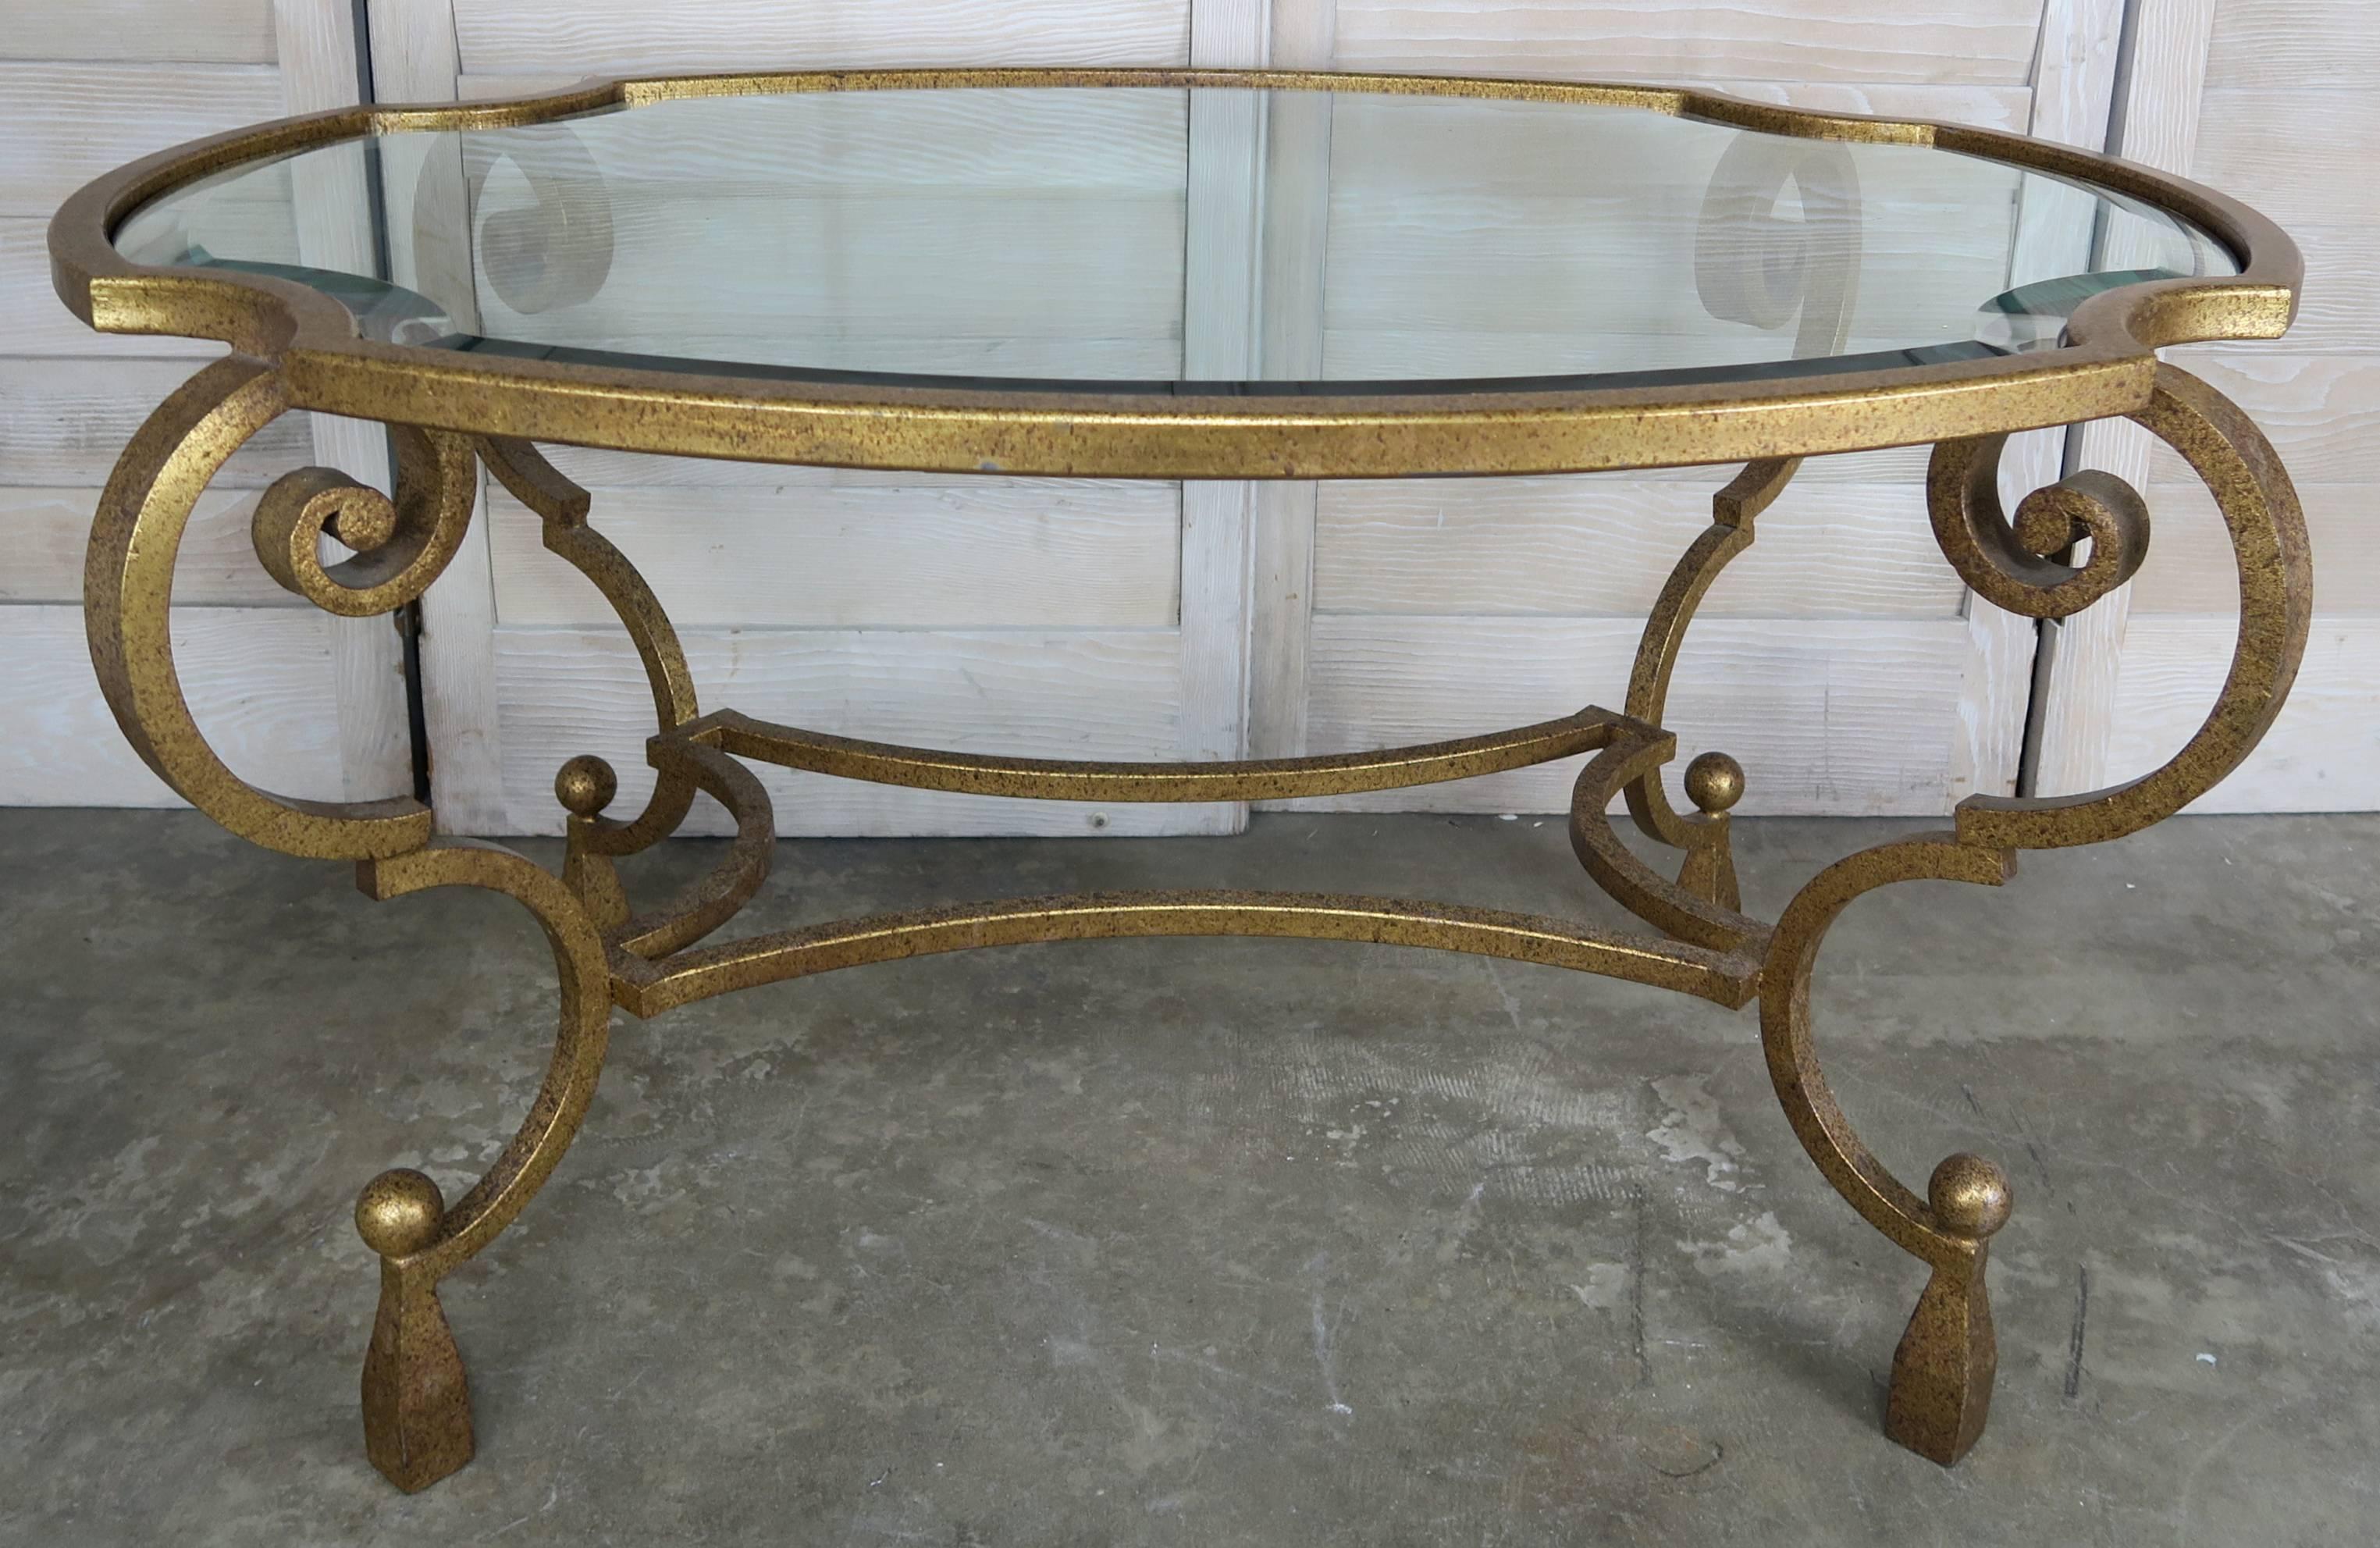 French gilt wrought iron oval shaped tea table with exaggerated cabriole legs that end in tassel feet. Inset oval glass top with 1 1/2